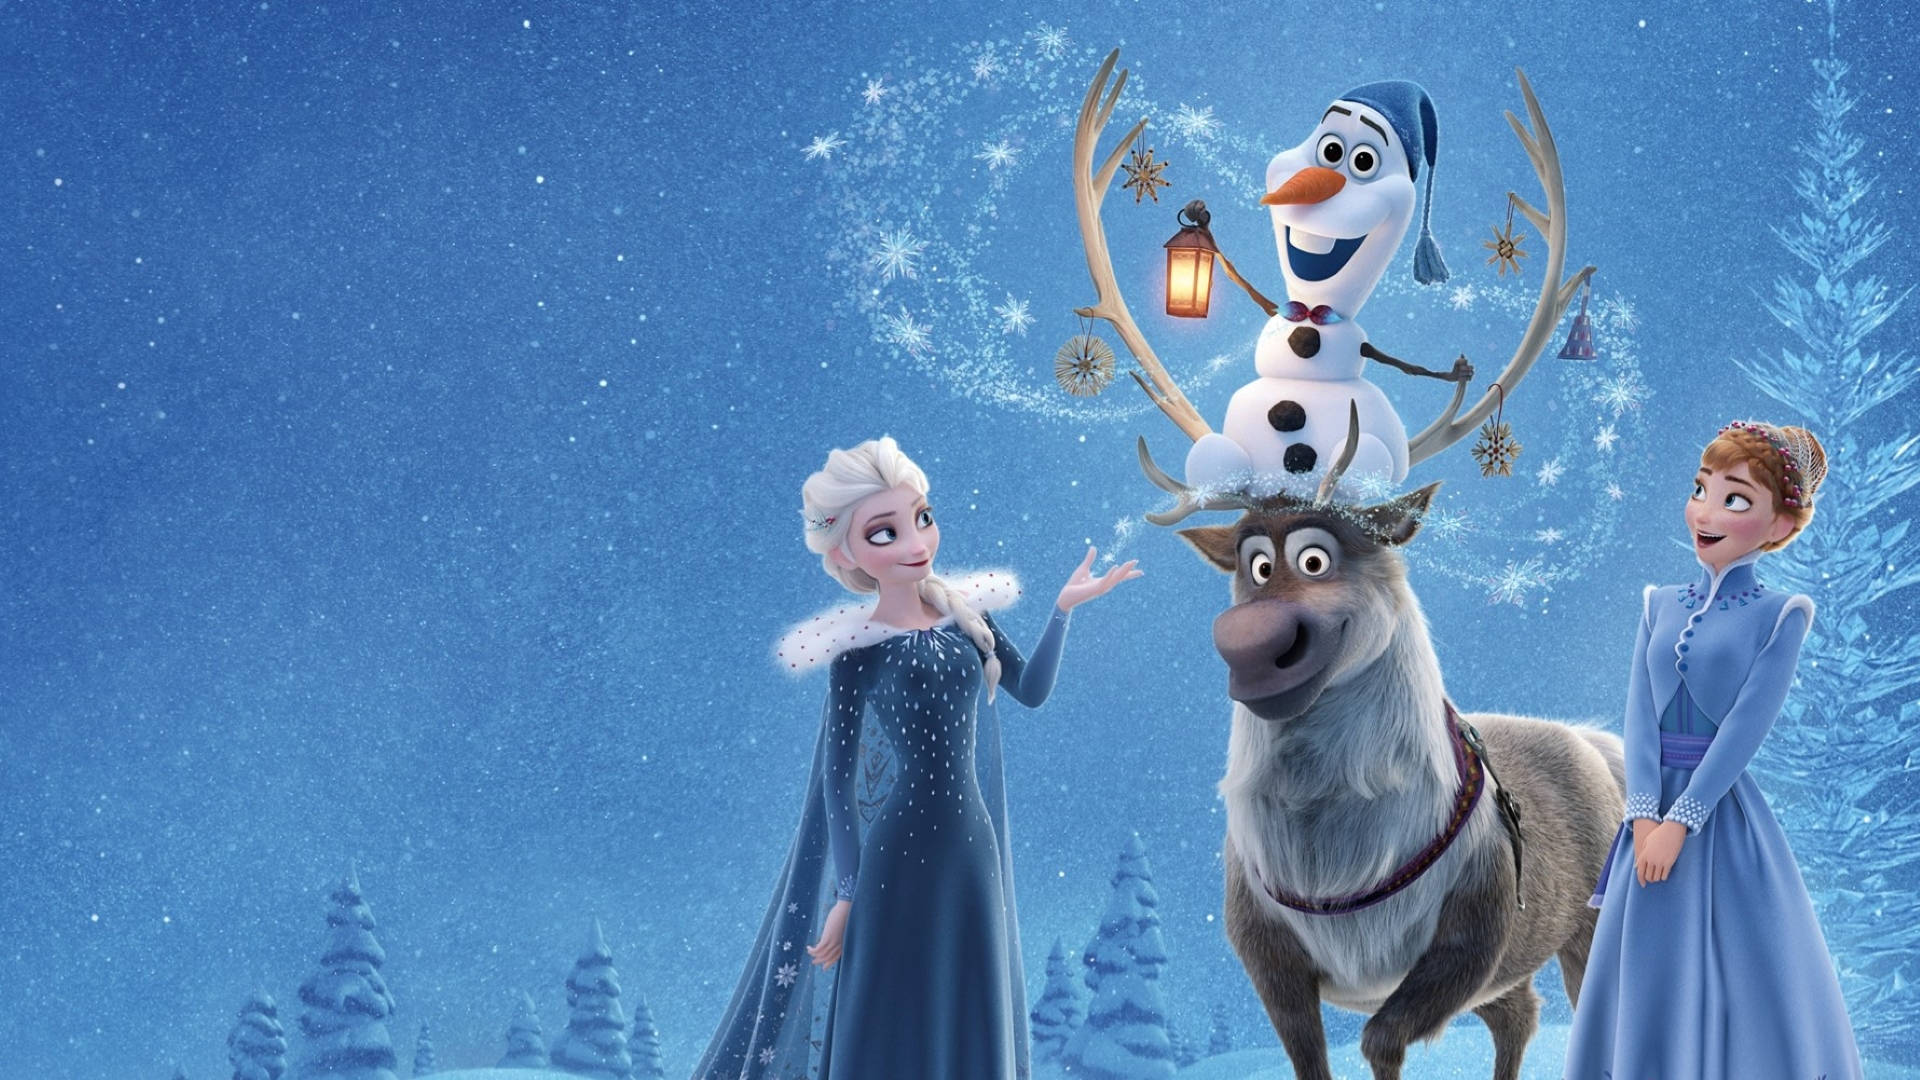 Olaf And The Frozen Cast Background